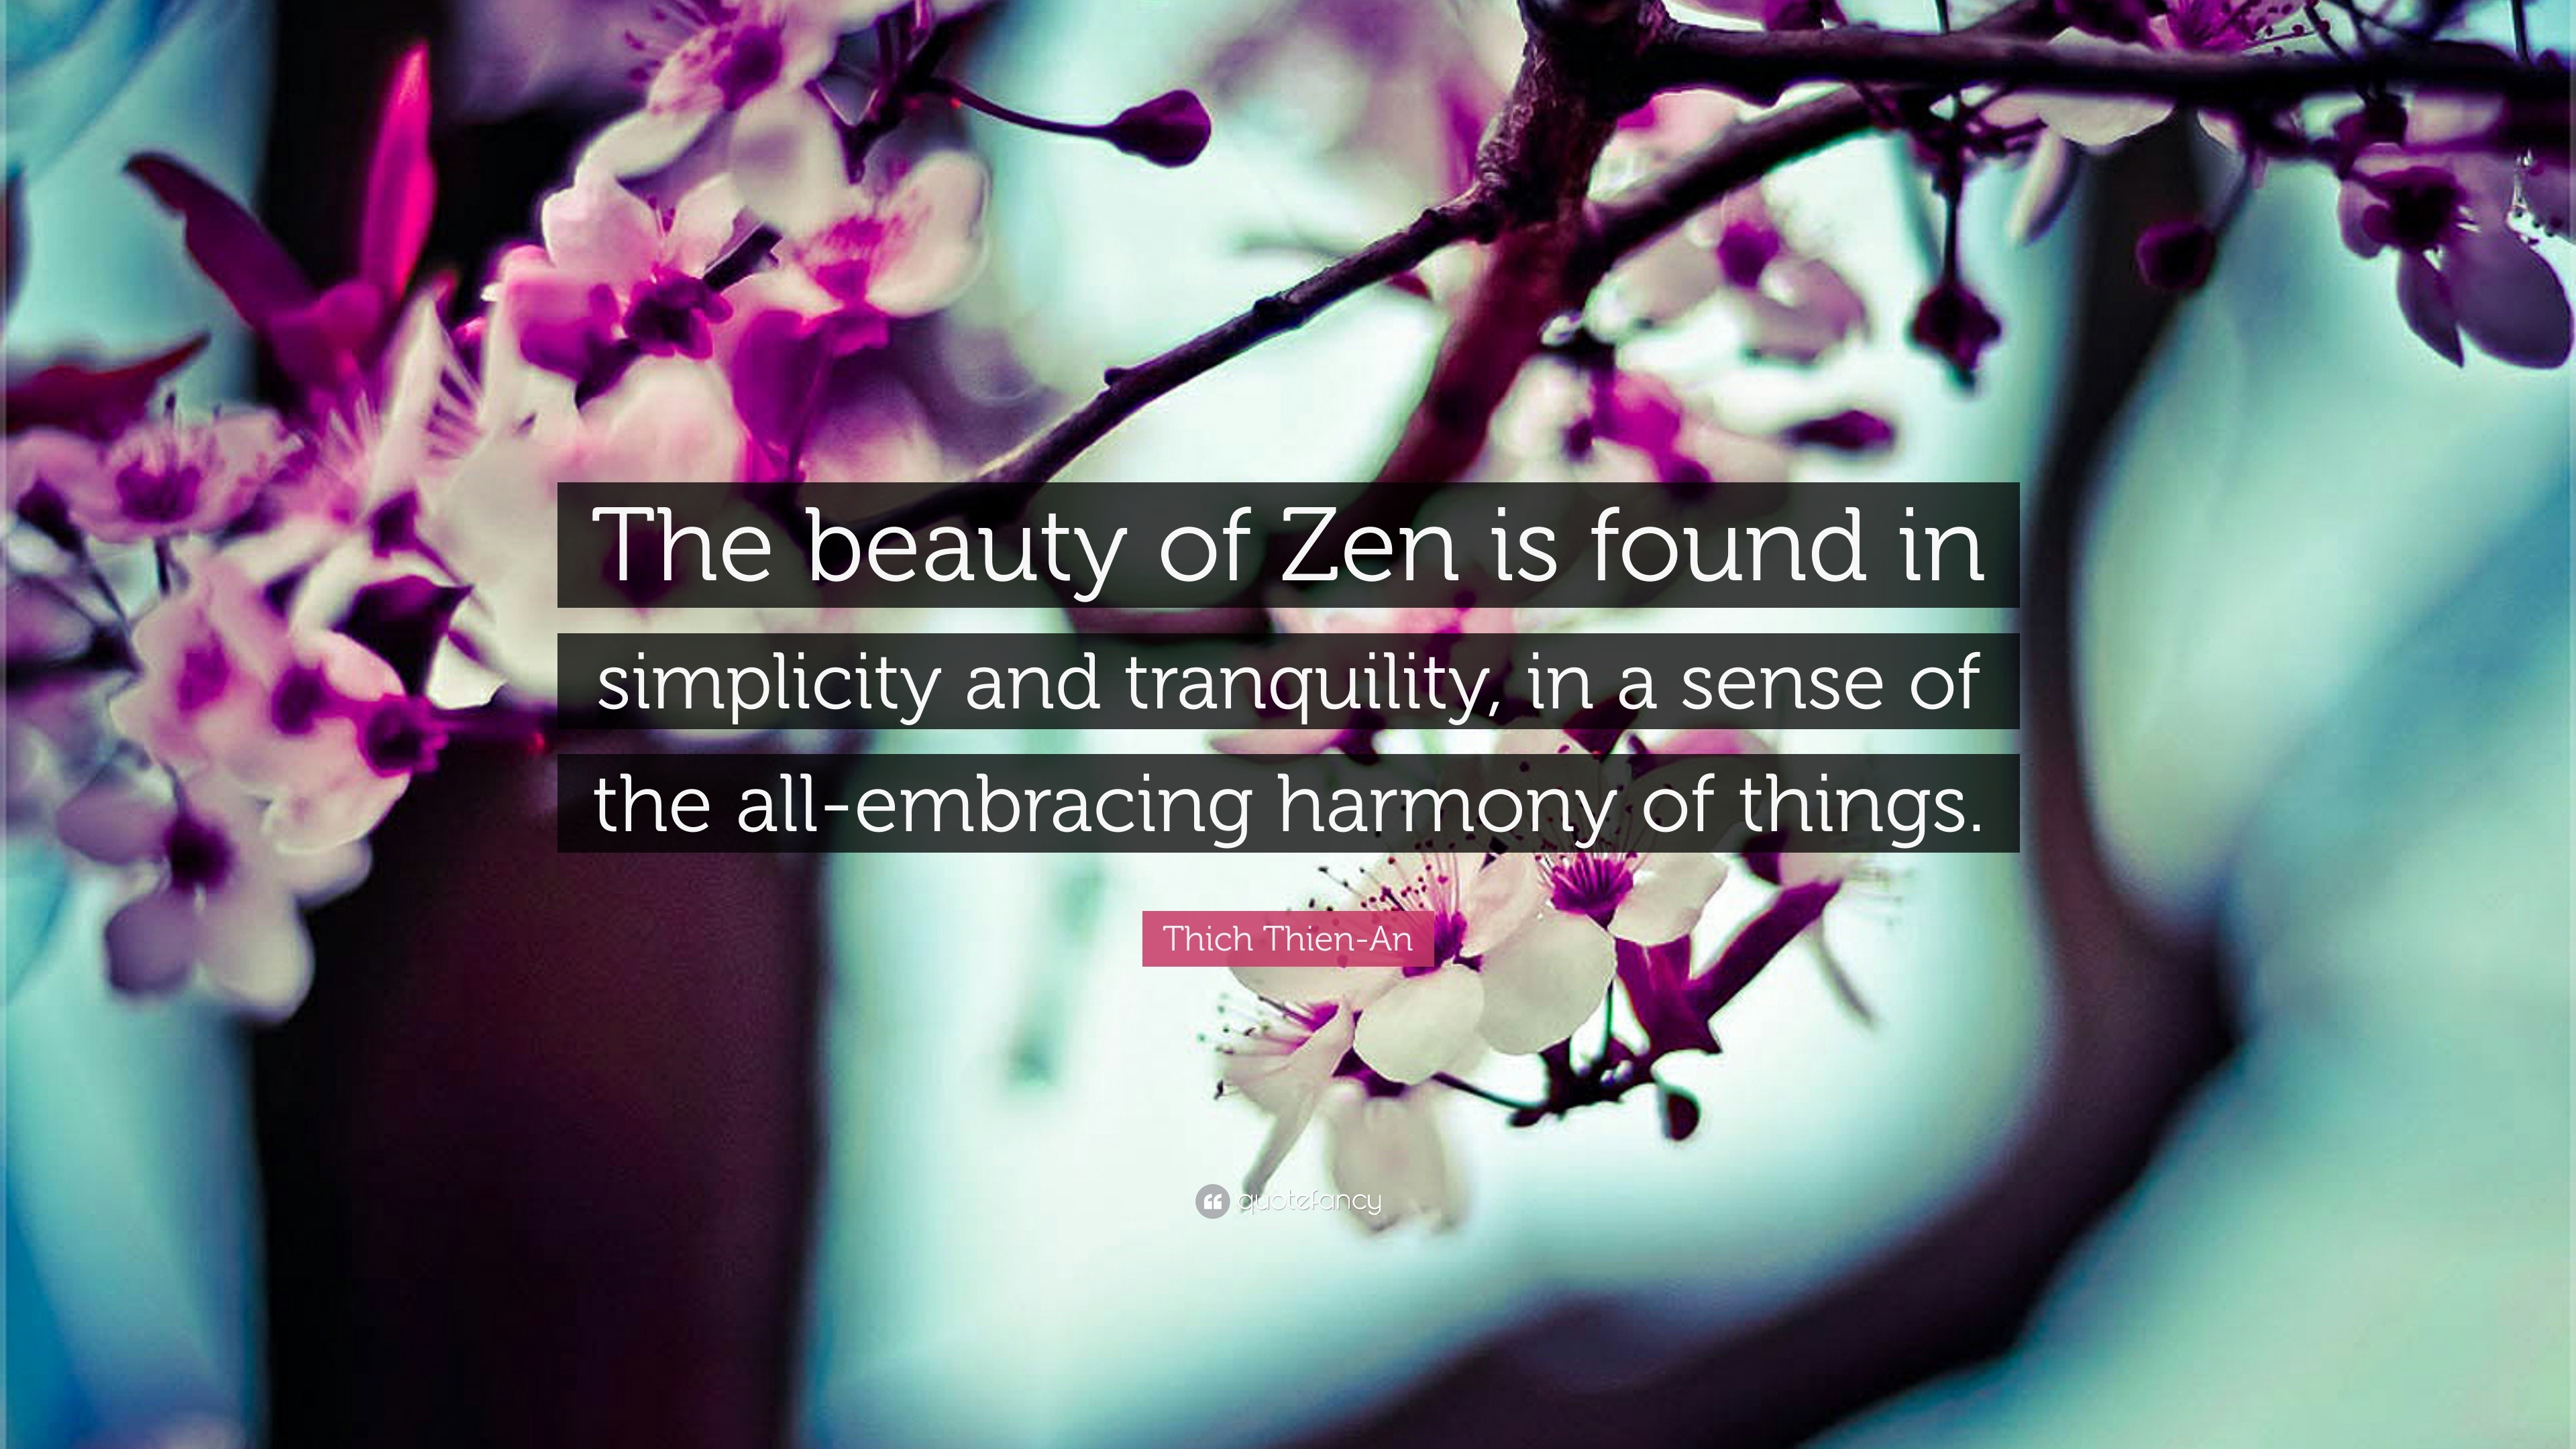 Thich Thien-An Quote: “The beauty of Zen is found in simplicity and